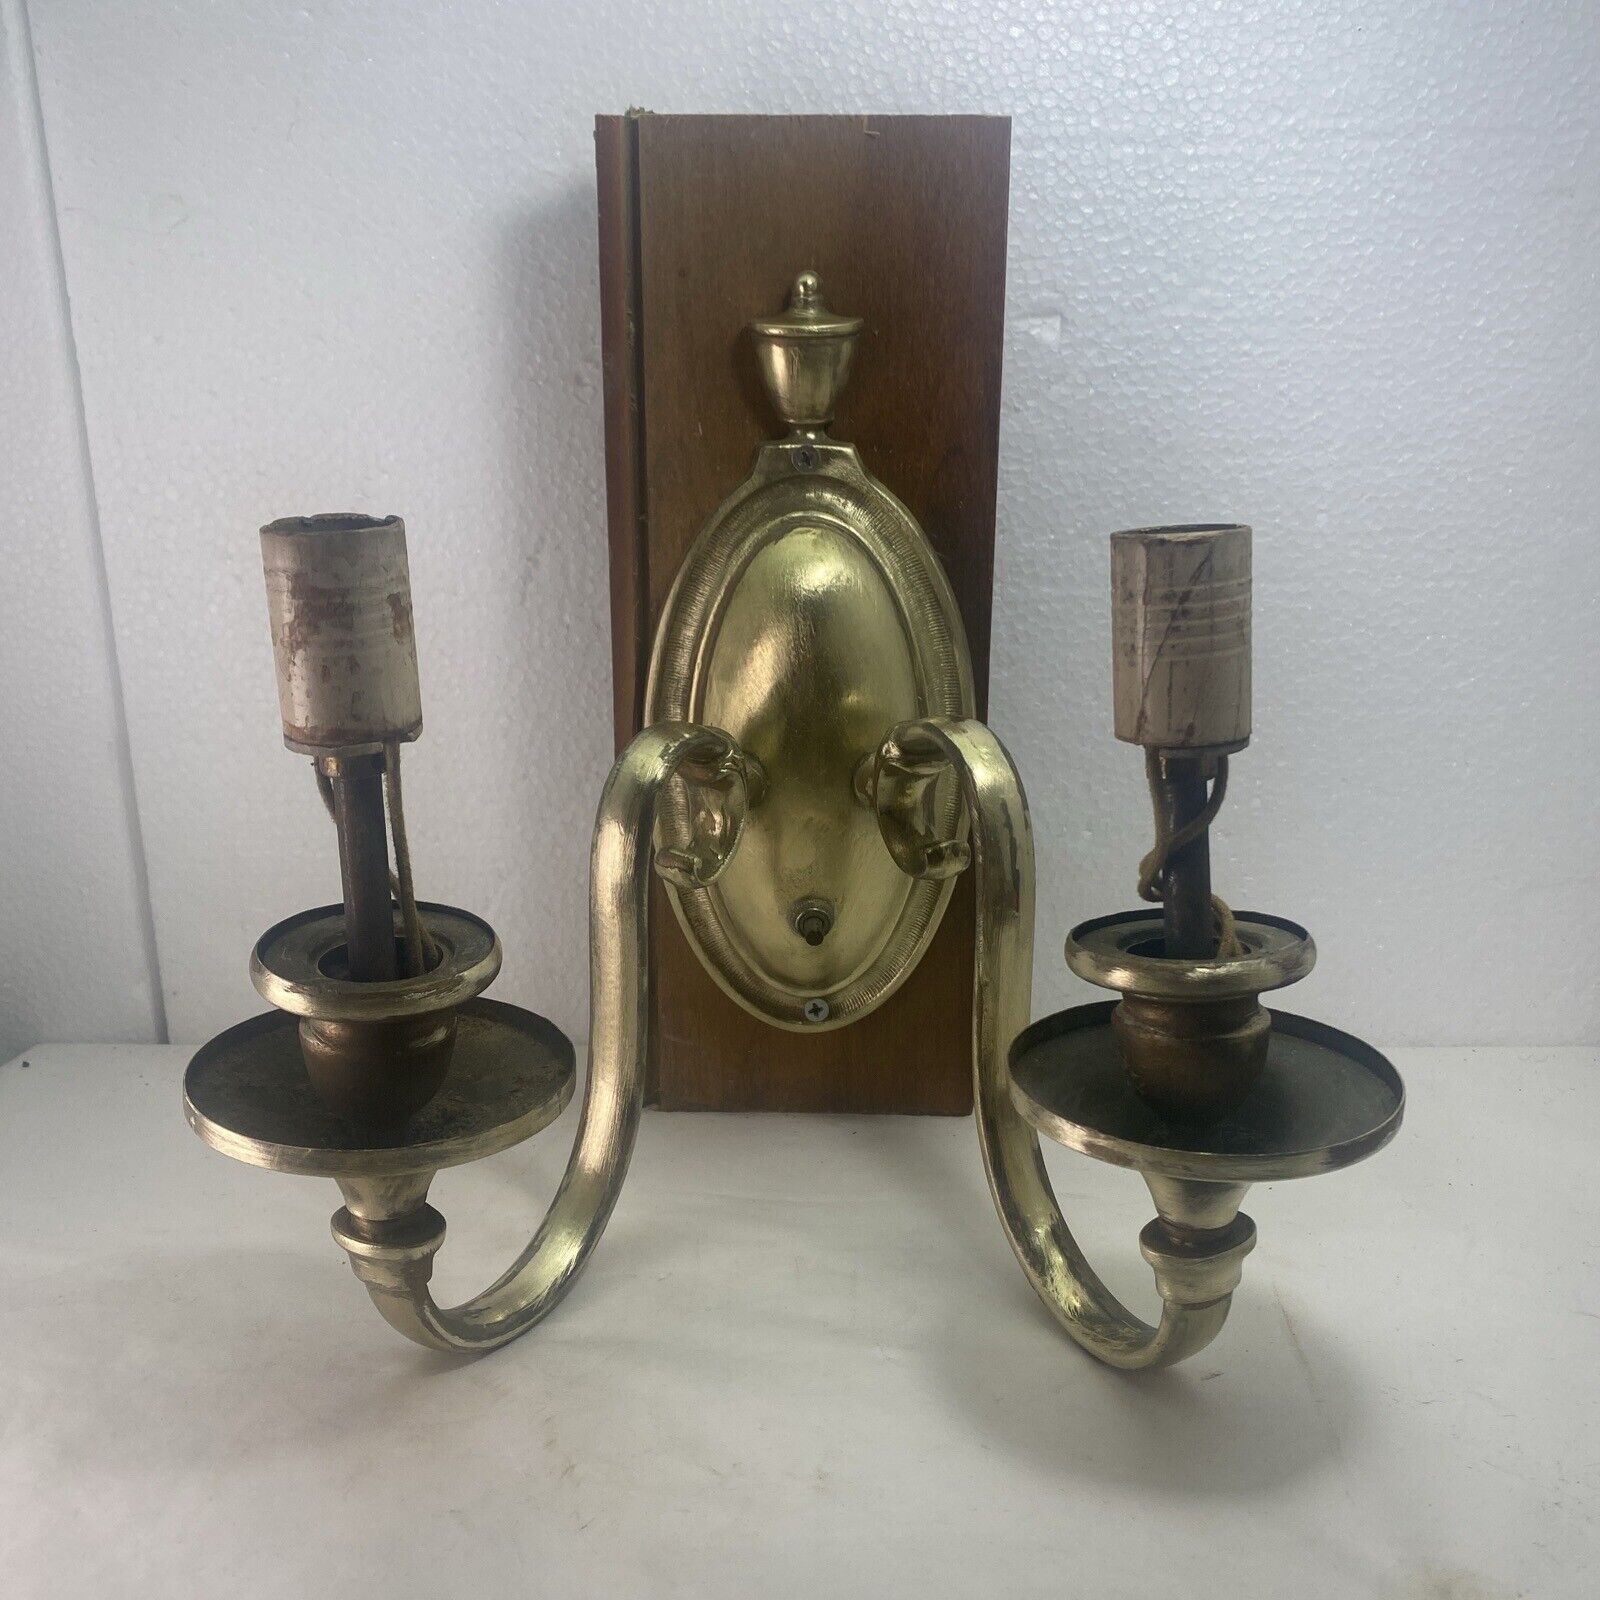 Oval Solid Brass Wall Mount Sconces Set Of 2 Wall Lamp Antique